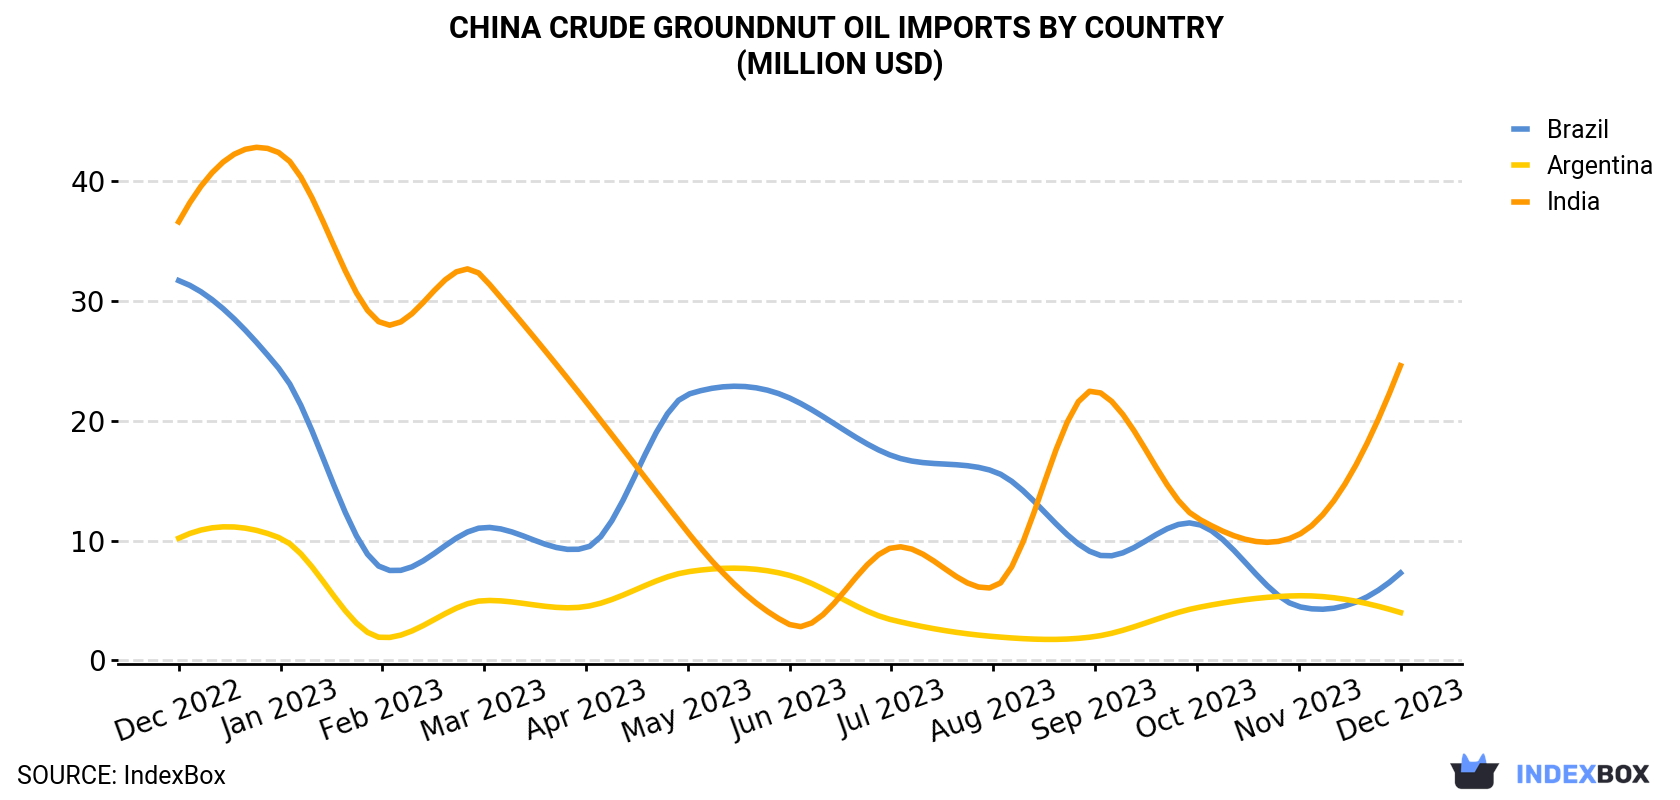 China Crude Groundnut Oil Imports By Country (Million USD)